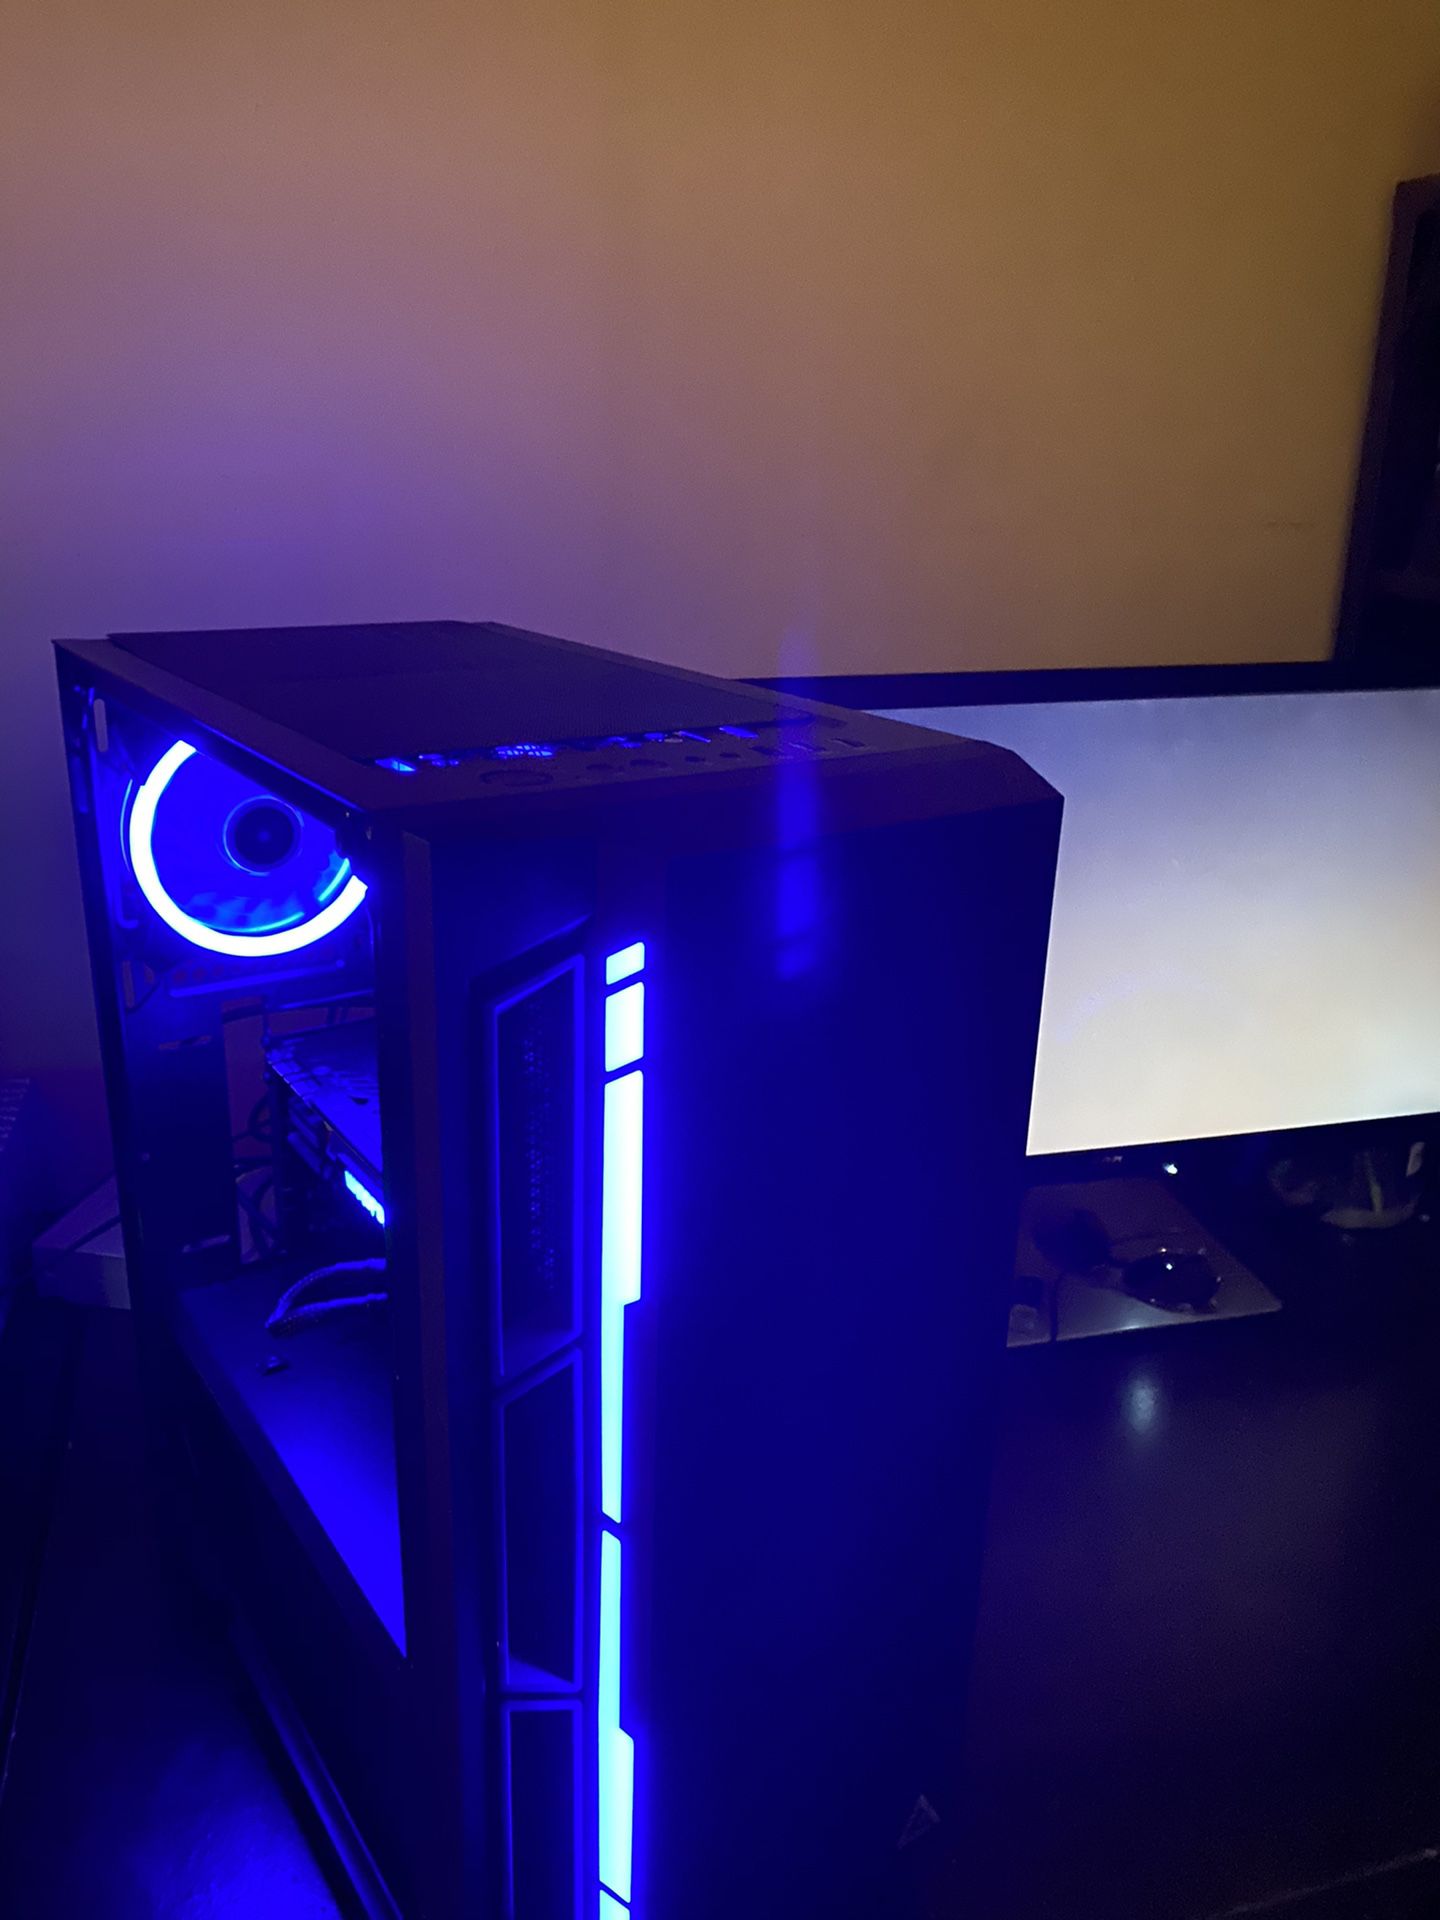 High End Gaming Computer, Intel CPU, 16G of RAM, GTX Nvidia 960 TI graphics and SSD storage